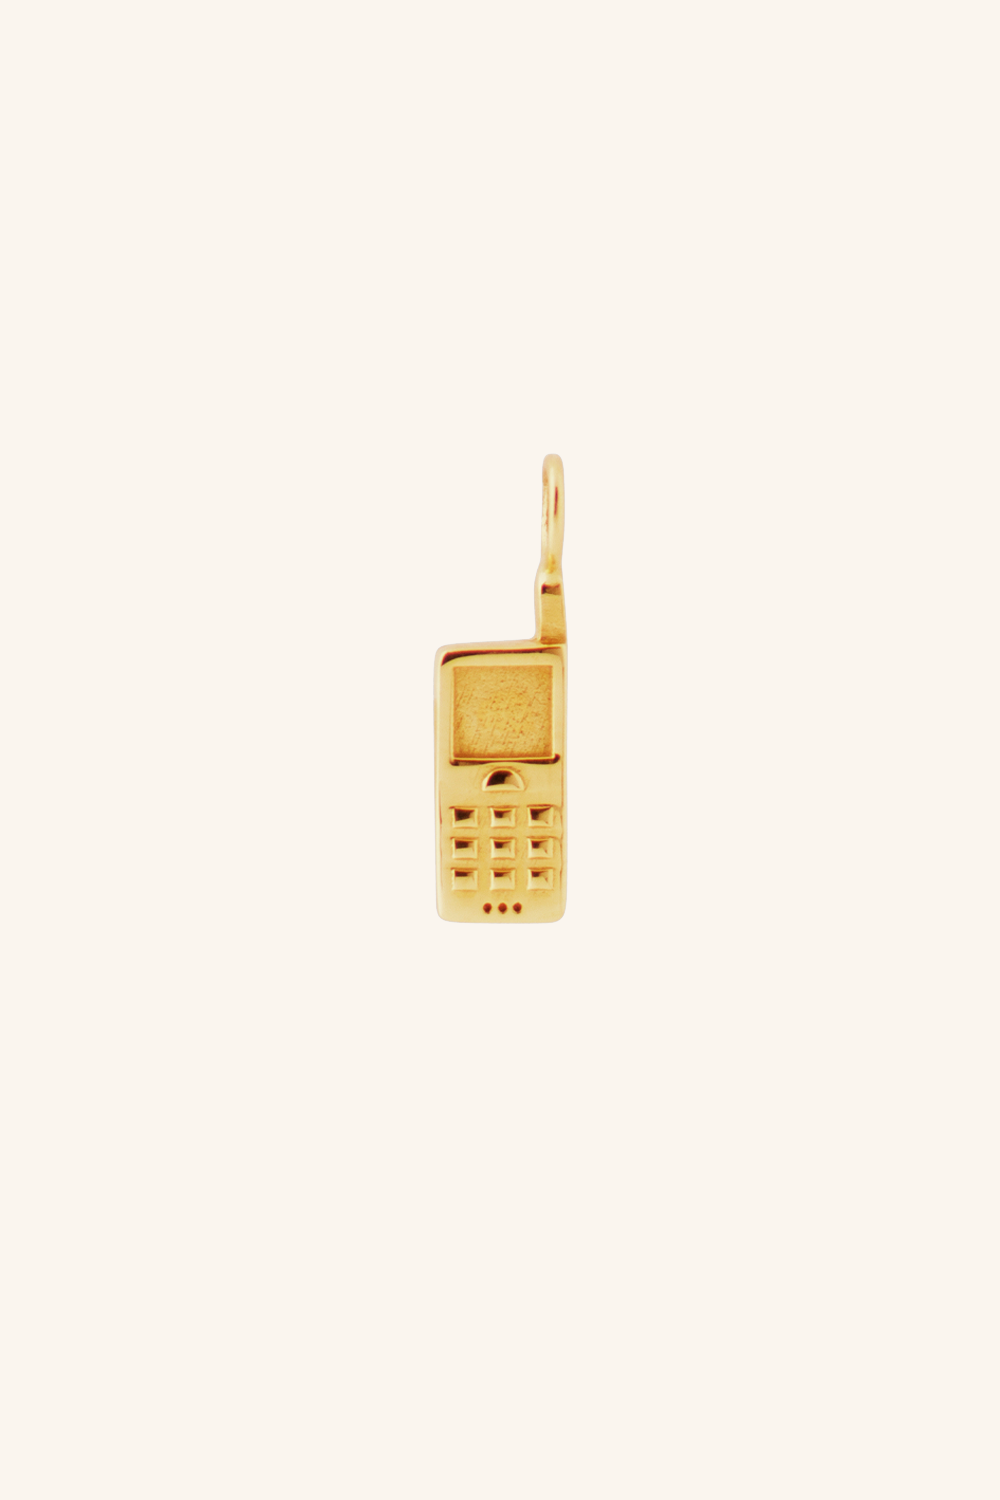 The Fine Gold Vintage Phone Charm 